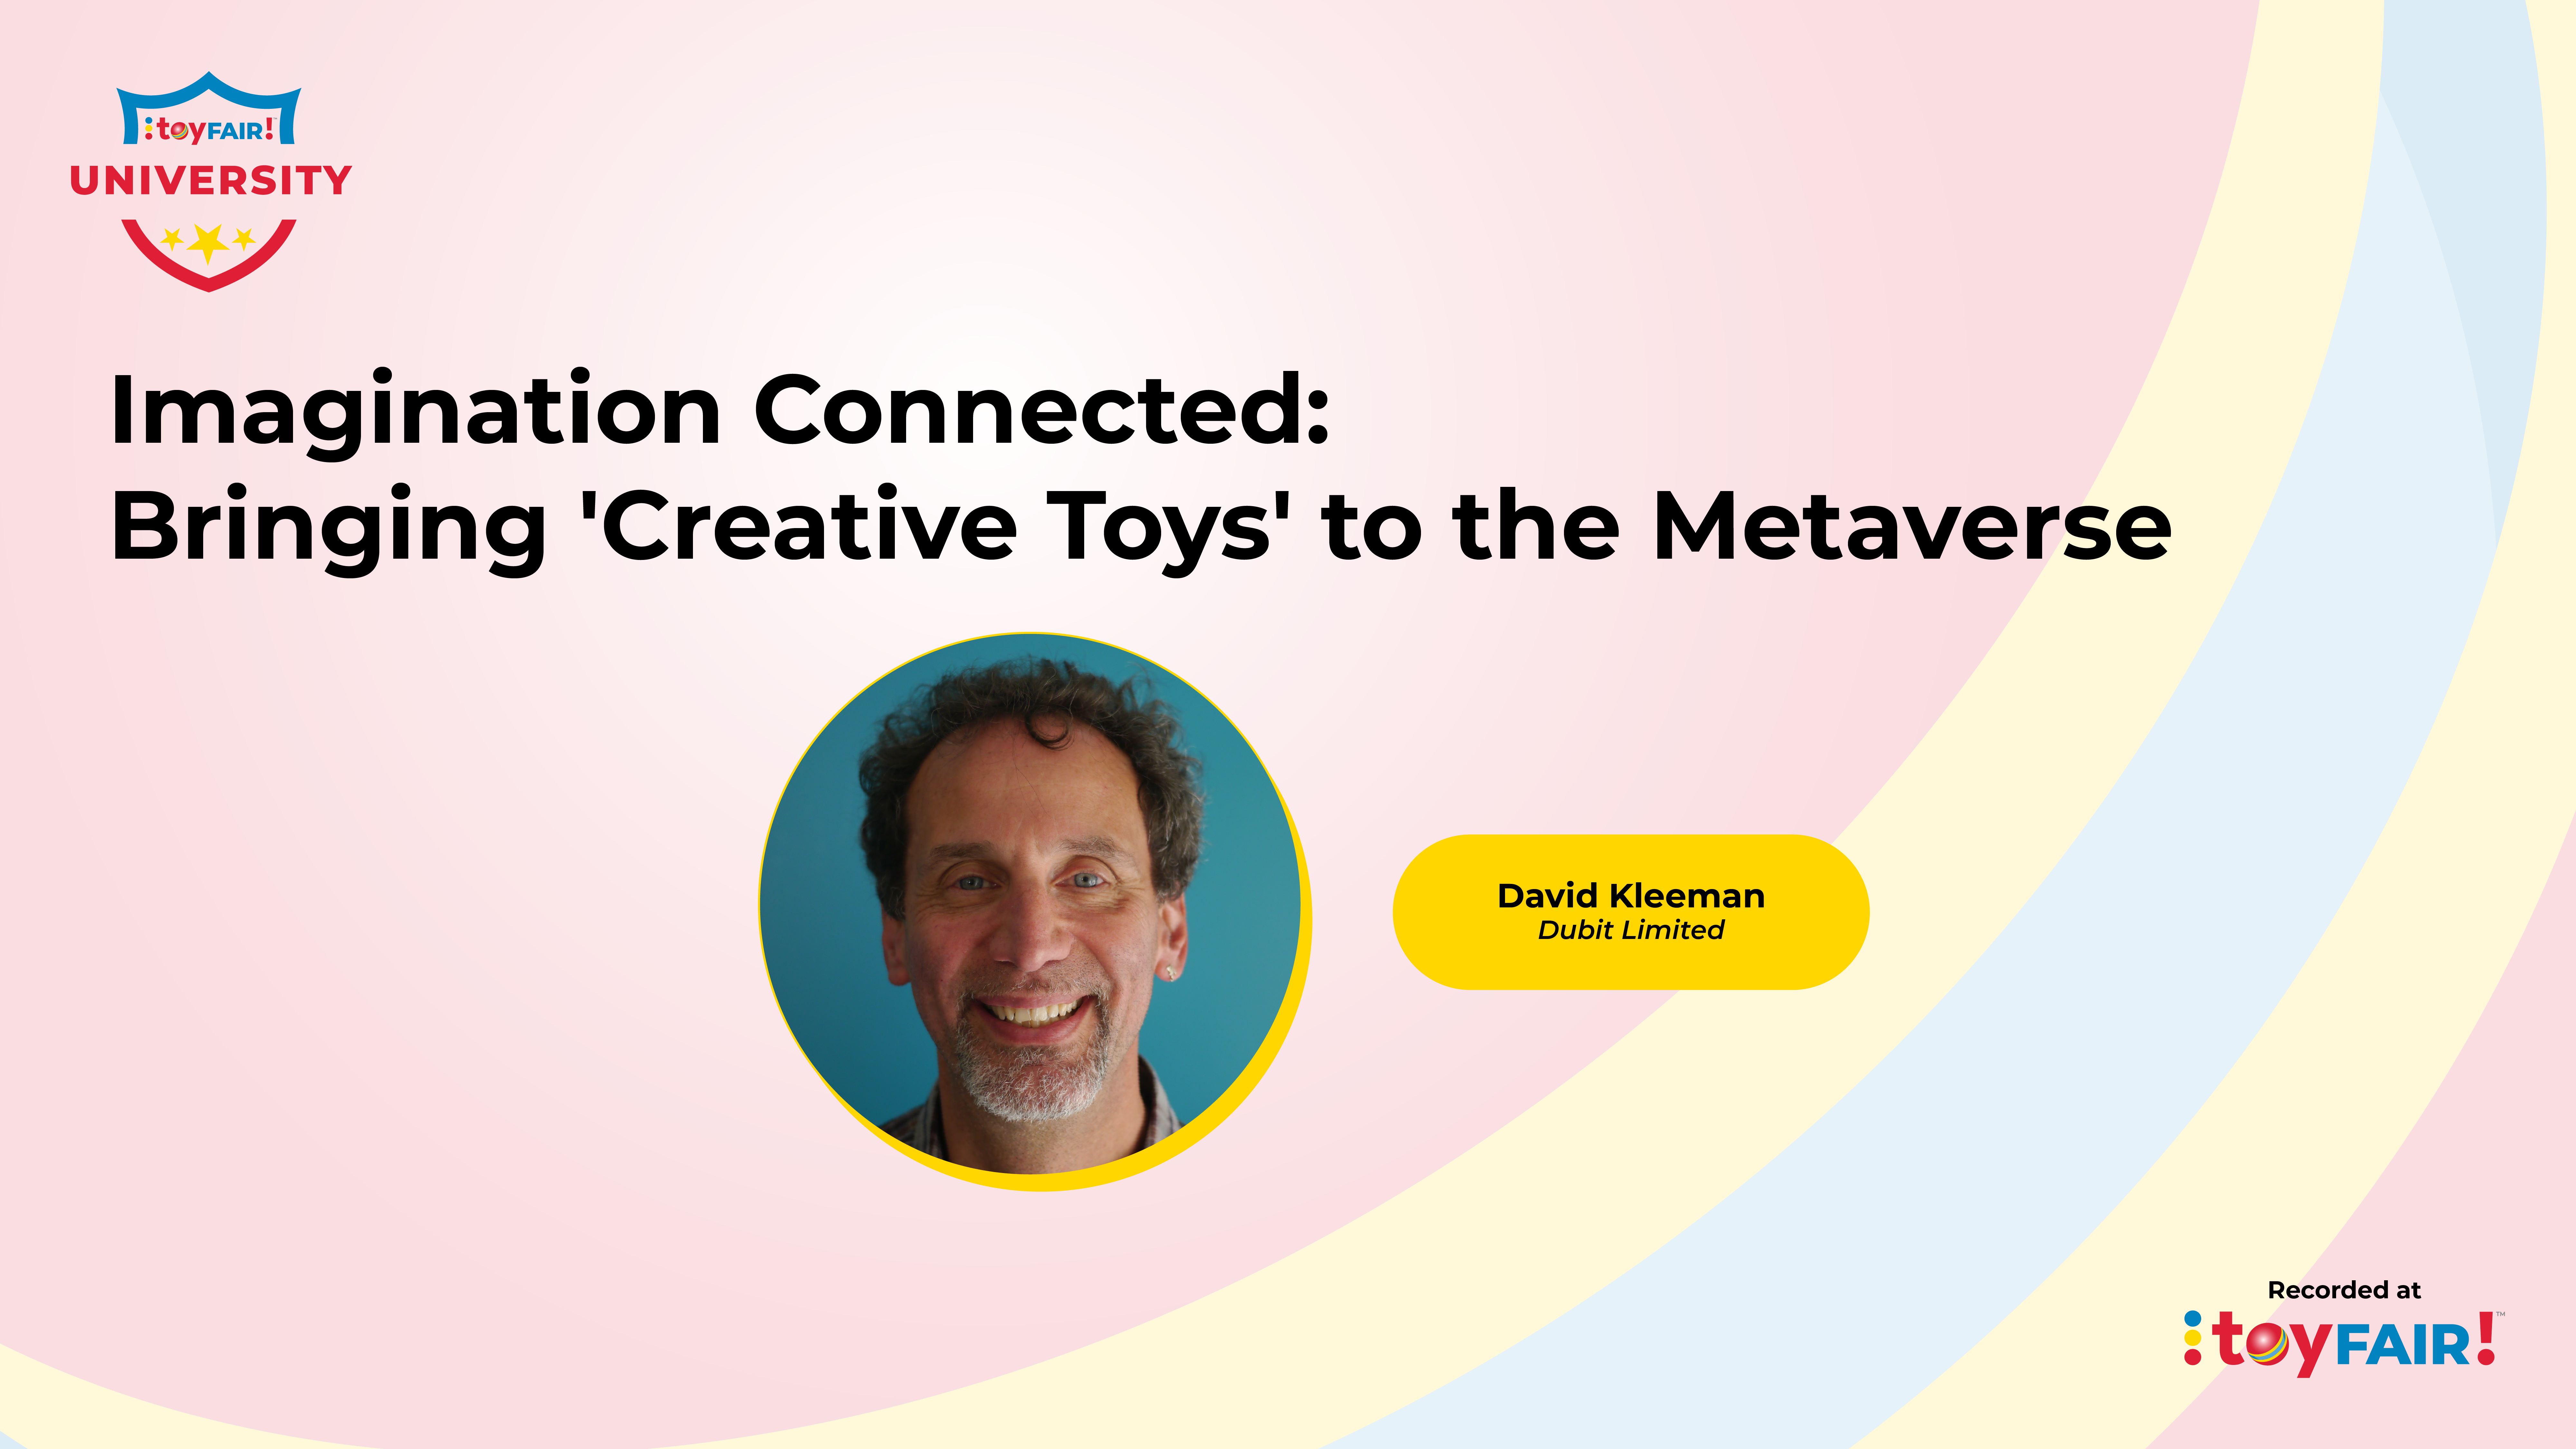 Imagination Connected: Bringing 'Creative Toys' to the Metaverse